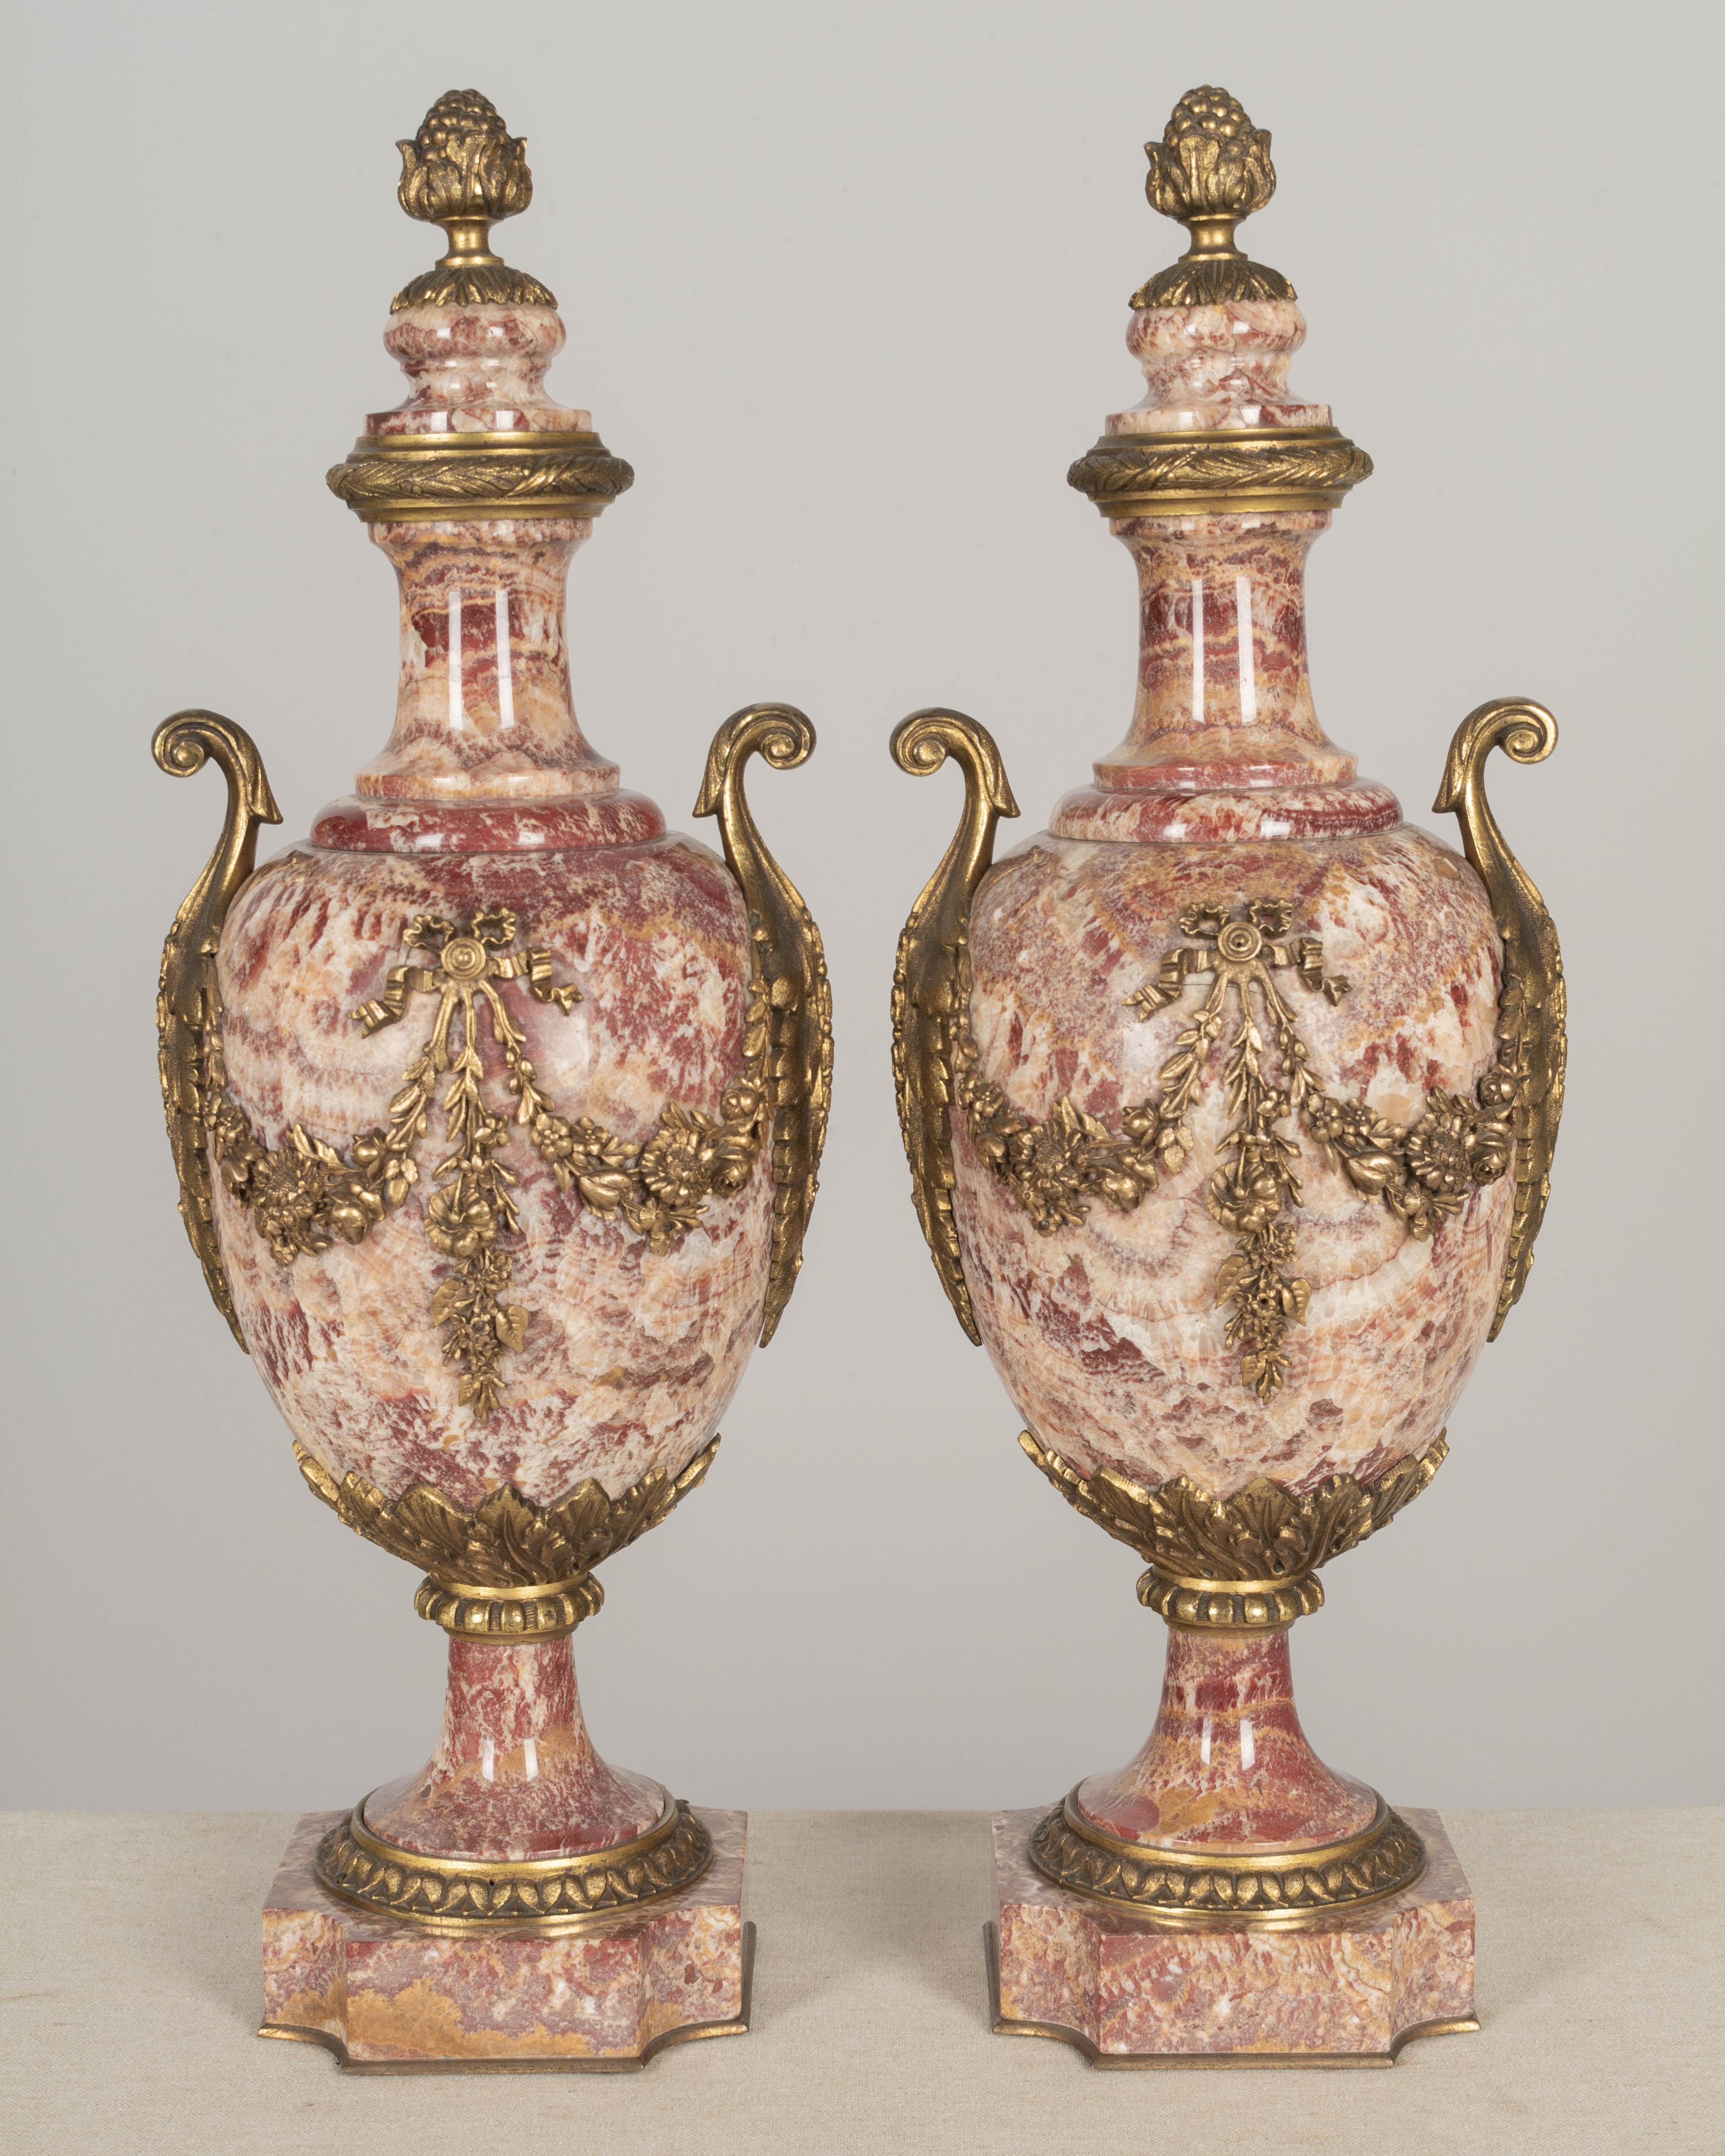 A pair of 19th century French bronze mounted urn form cassolettes with beautiful deep red and orange veined polished marble. Nicely detailed cast floral garlands, and large foliate handles. Attached lids with acorn finials. Small chip to the lid of